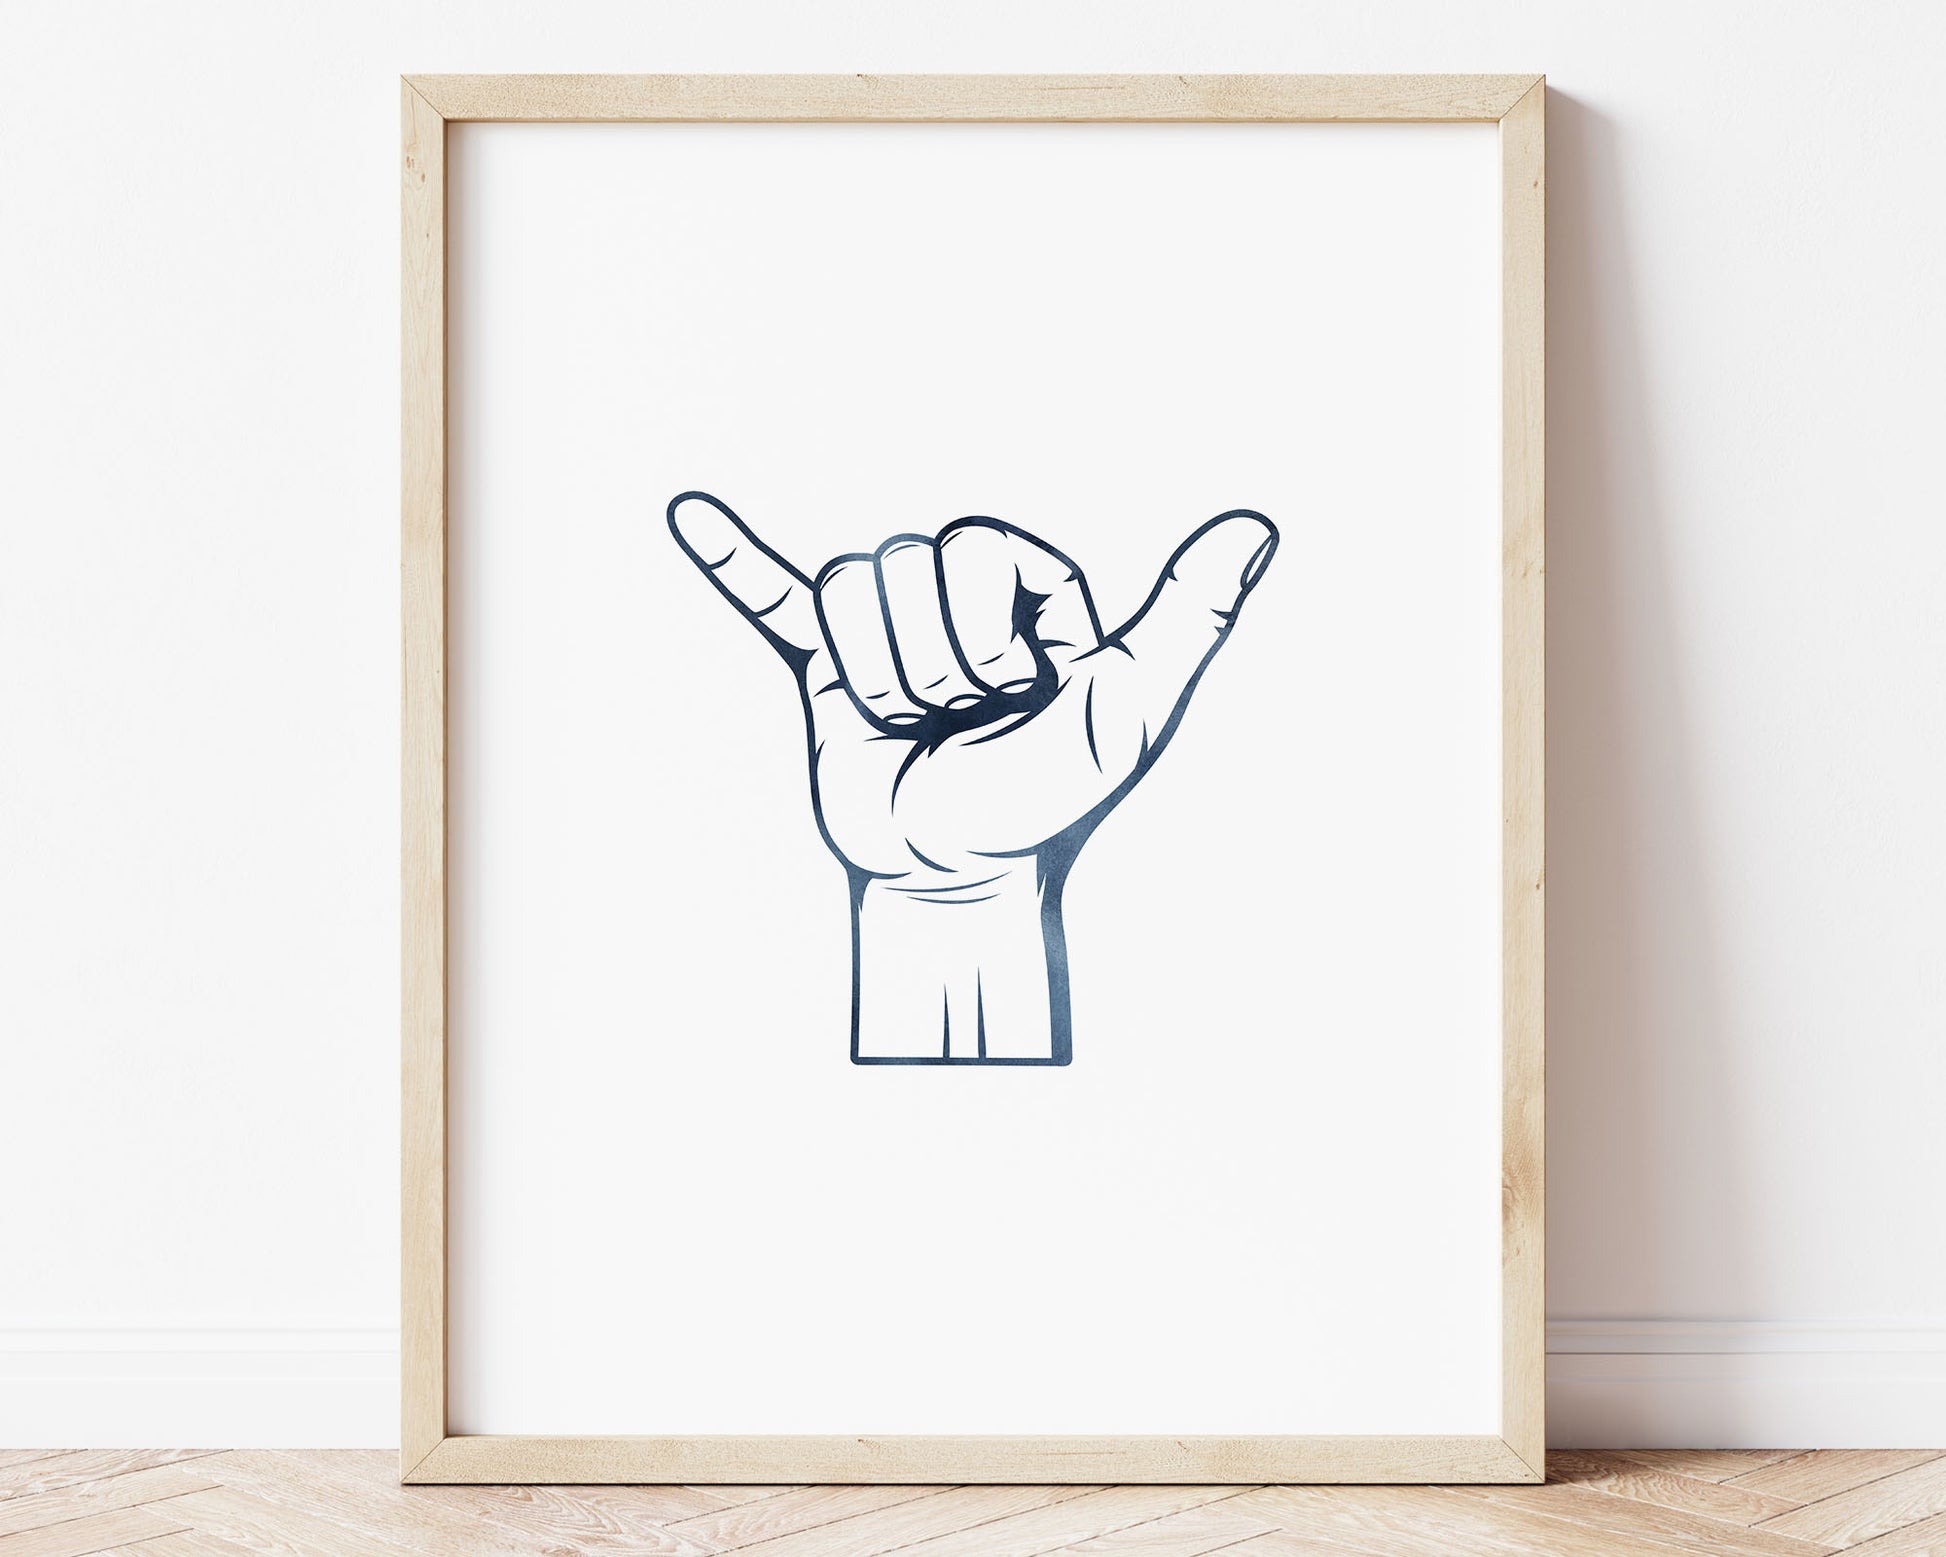 Watercolor Shaka Printable Wall Art featuring navy blue watercolor illustration of shaka hang loose hand sign. Perfect for Baby Boy Surf Nursery Decor, Baby Girl Surf Nursery Wall Art, Kids Coastal Bedroom Decor, Children's Beach Bathroom Wall Art or Hawaii Wall Art Playroom Decor.